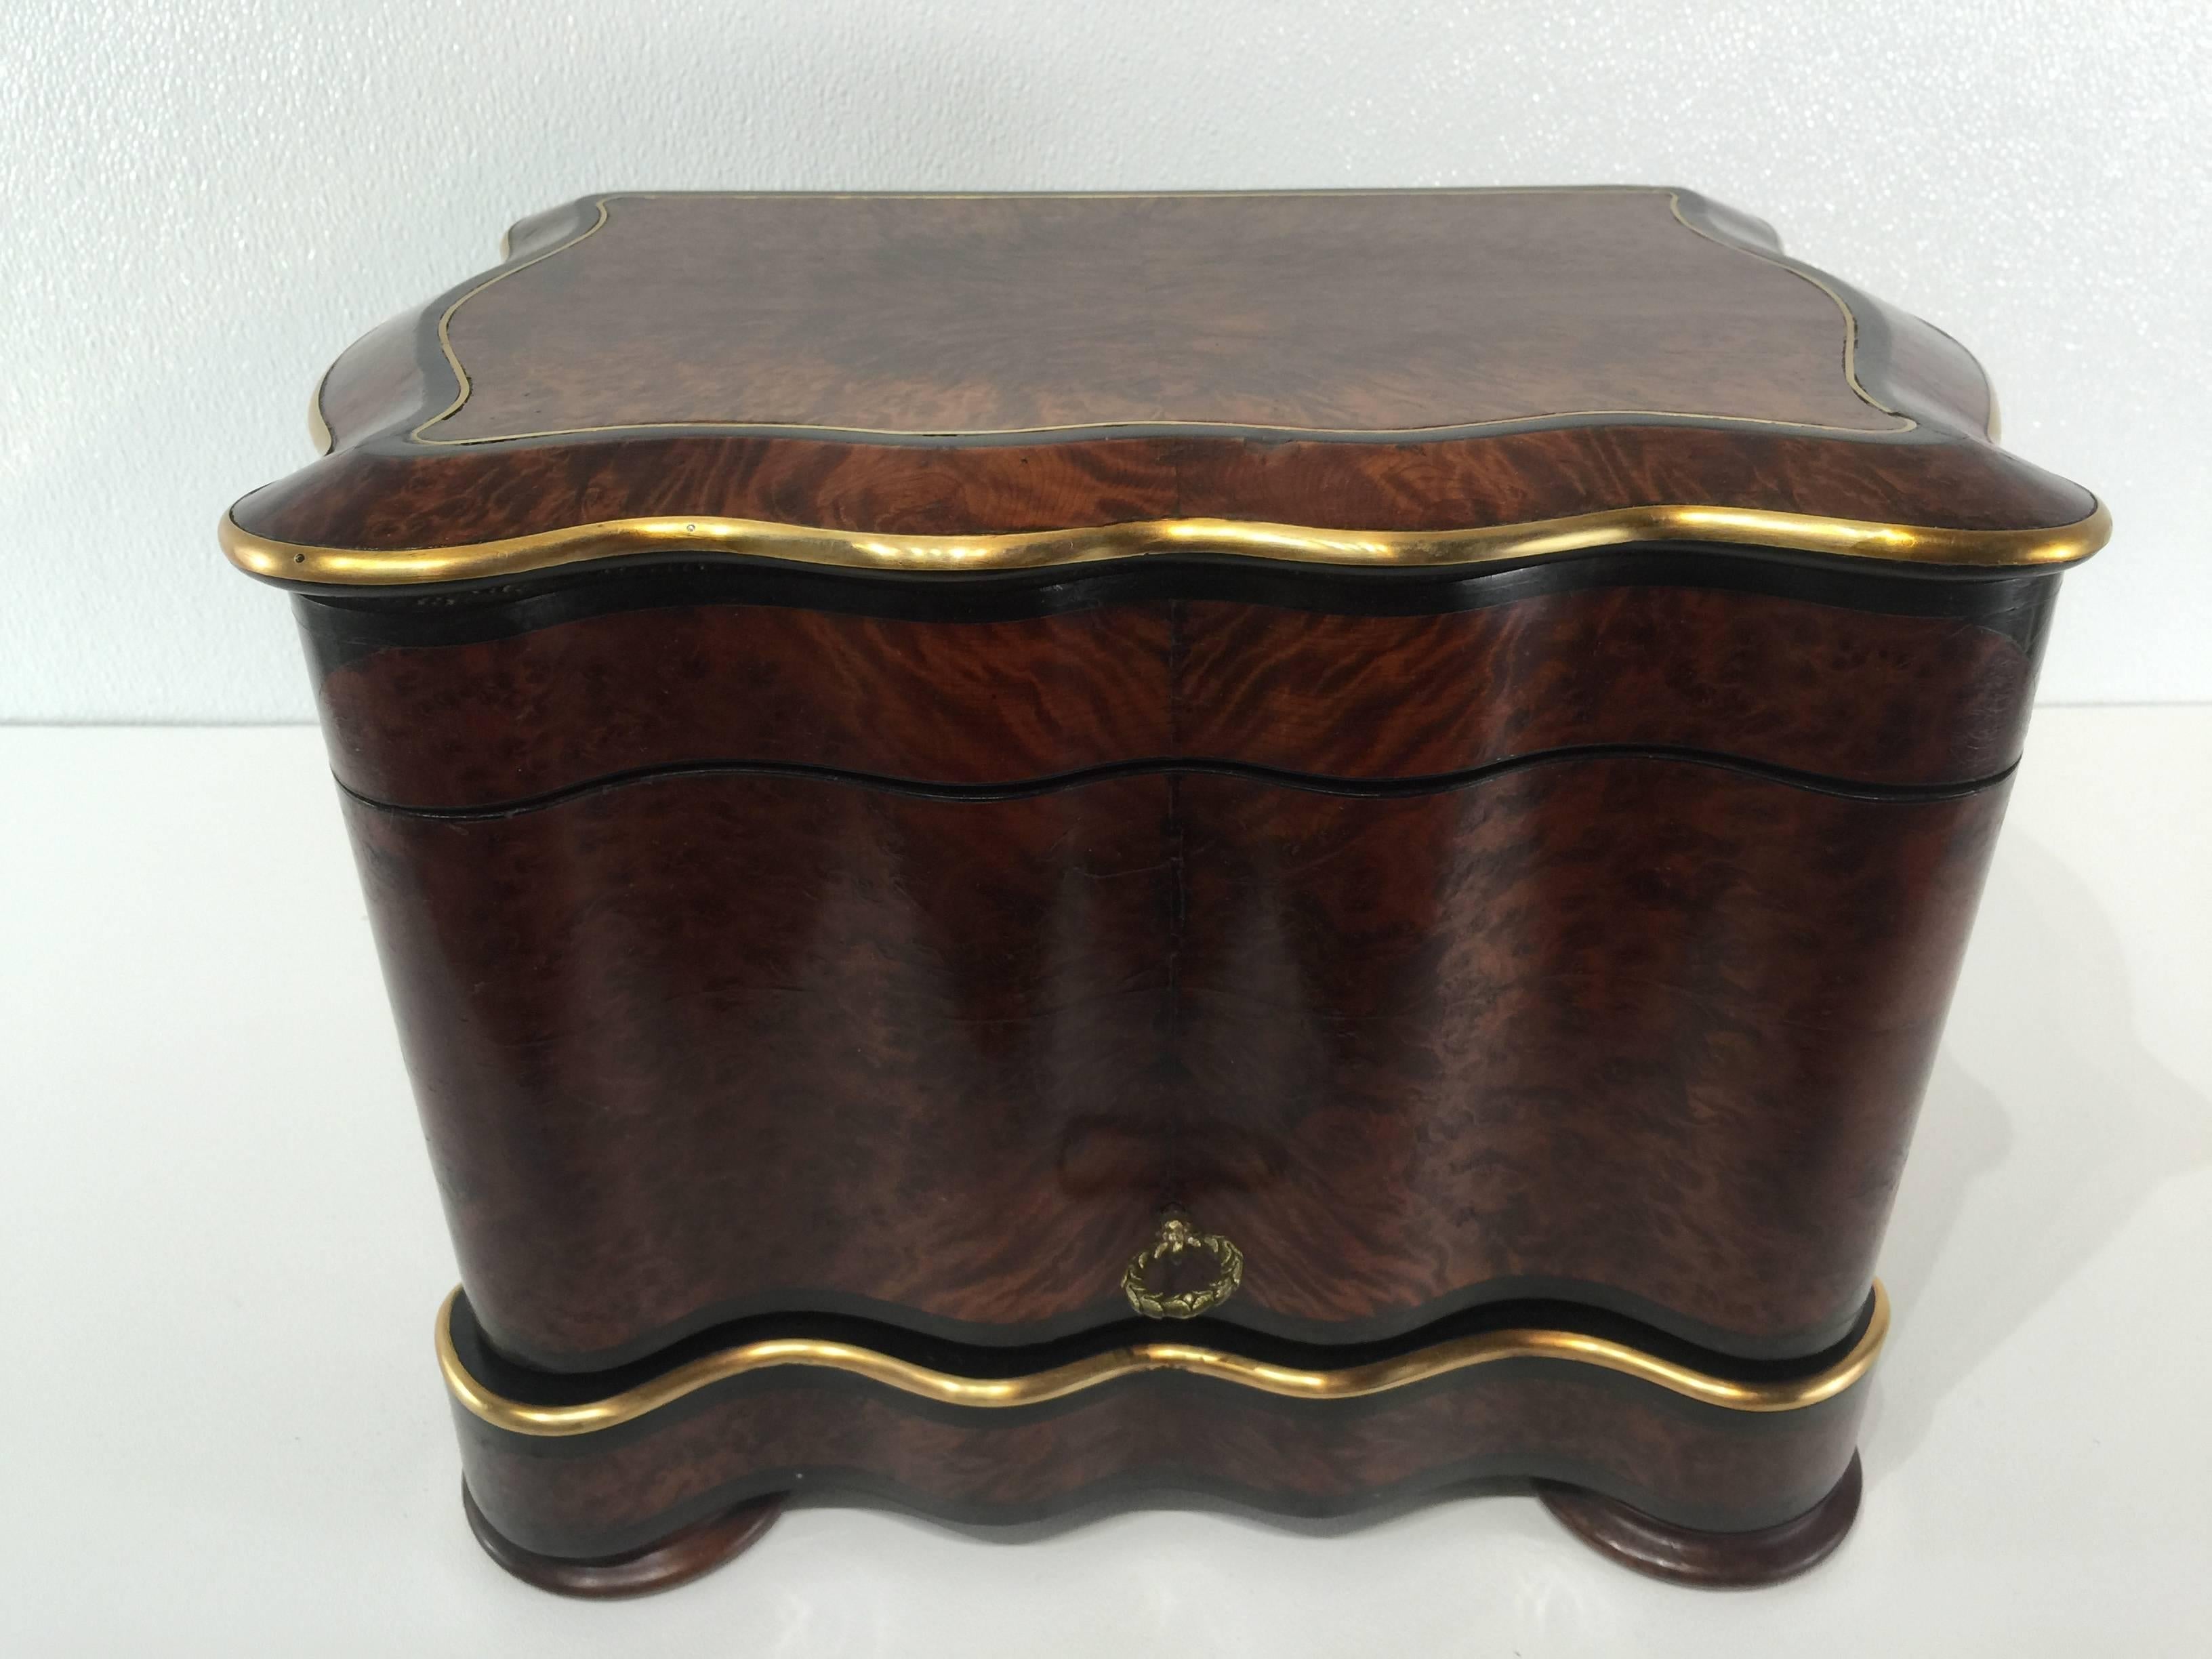 Napoleon III Tauntless, The case a serpentine carpathian burl and mahogany with inset gilt bronze mounts, when opened revealing a separate ormolu and rosewood caddy holding four decanters and and twelve cut crystal cordials , all in the style of